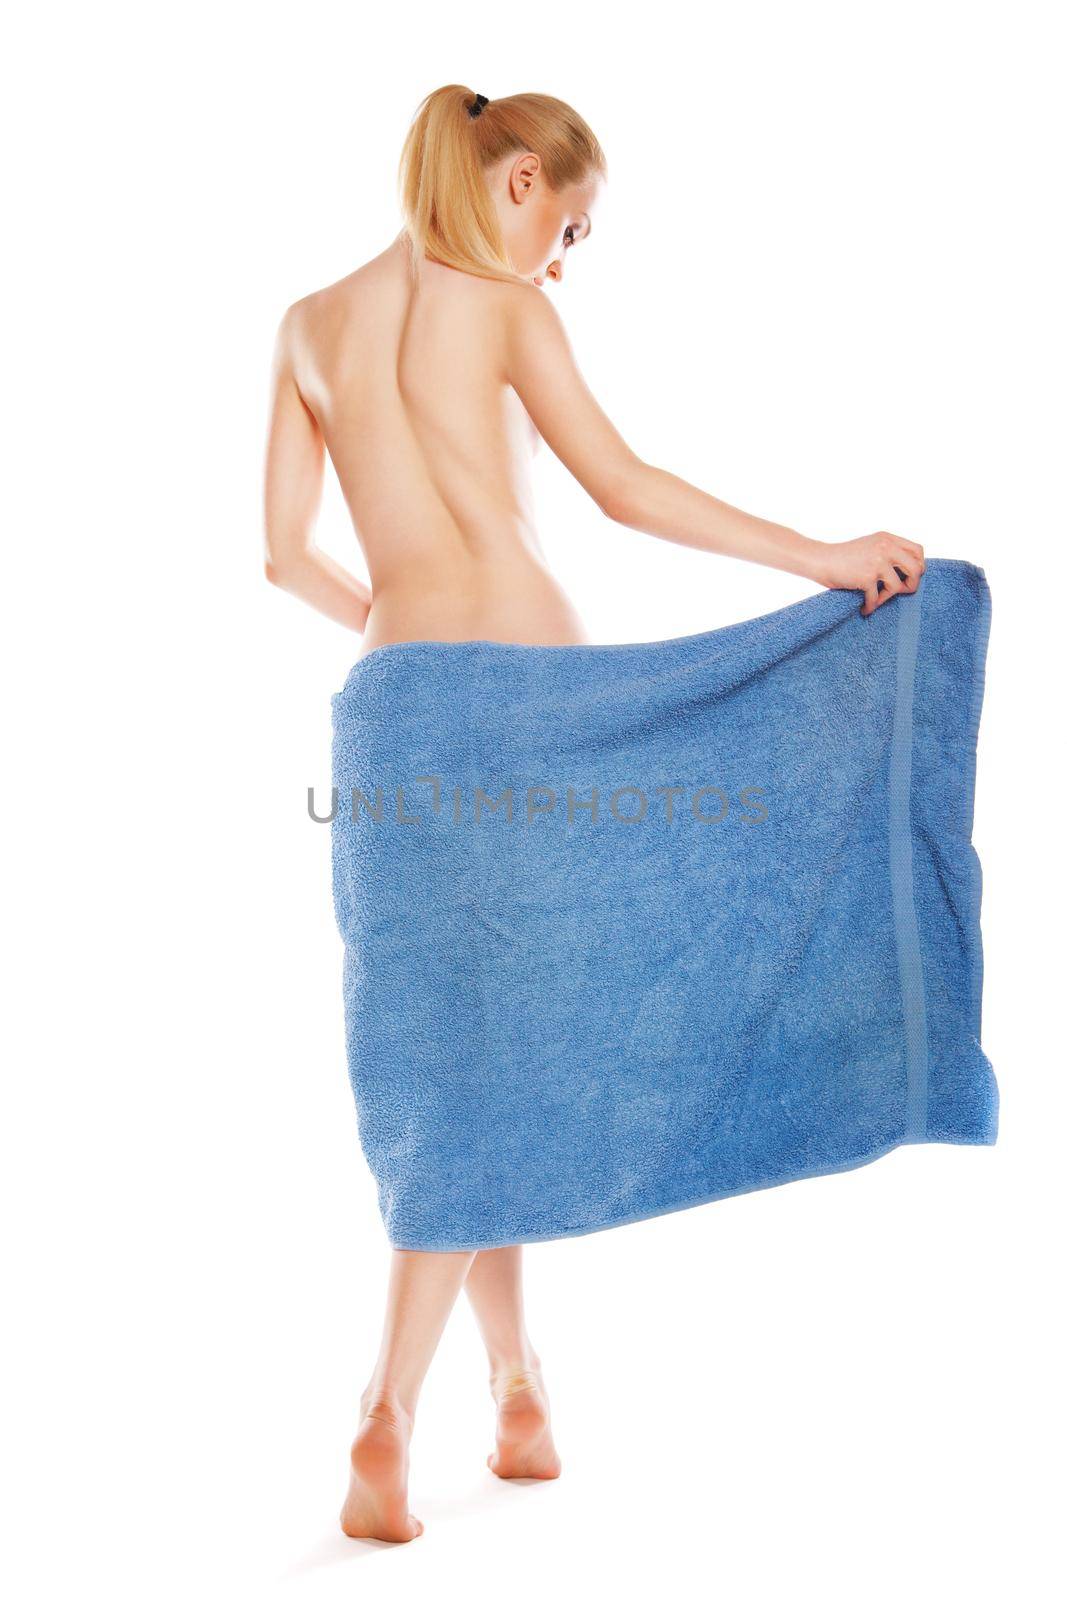 slim young woman after bath with towel over white by Julenochek